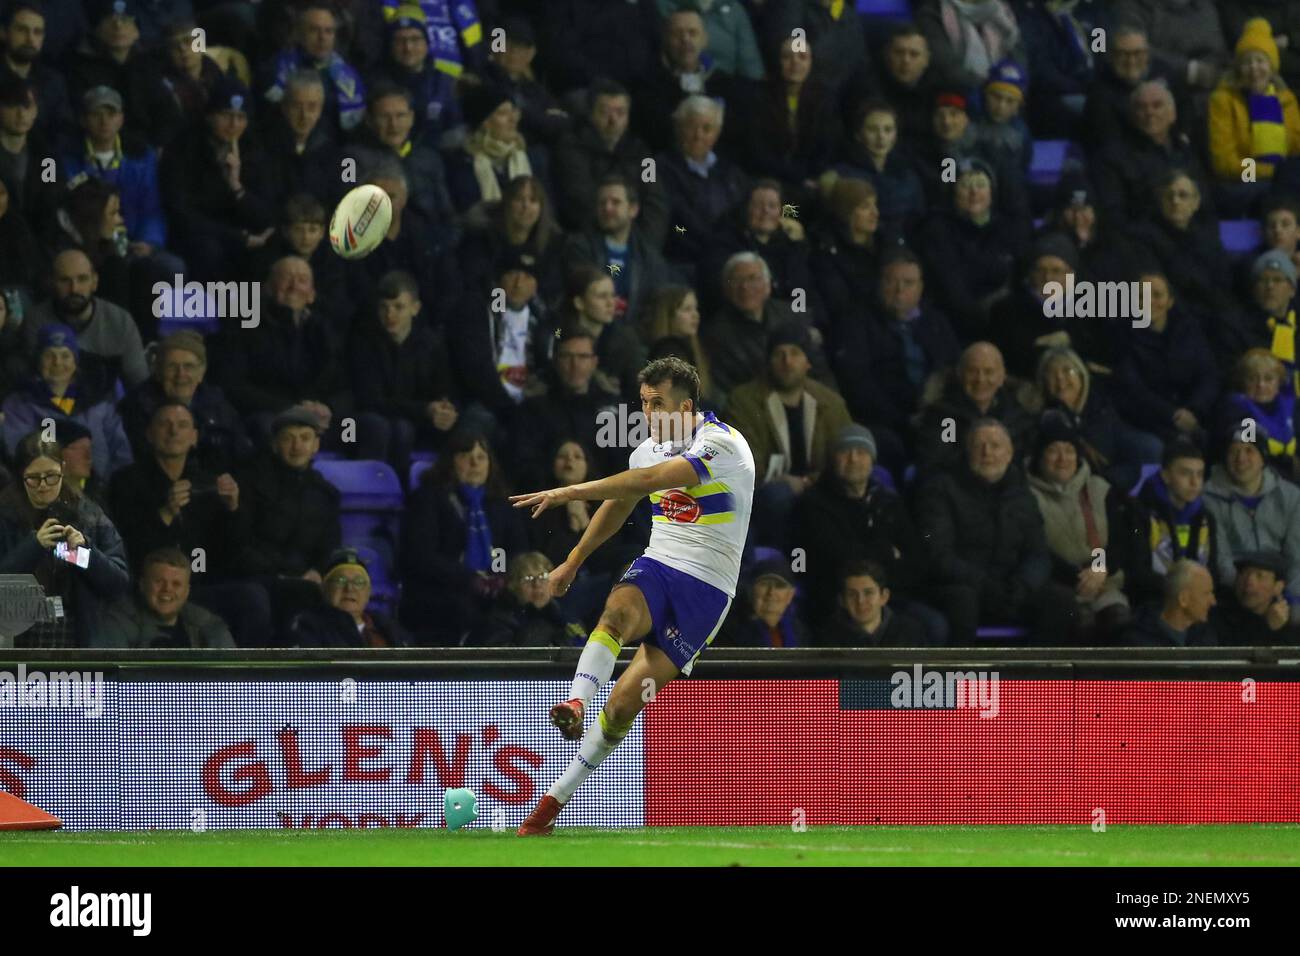 Stefan Ratchford #4 of Warrington Wolves kicks a penalty and misses during the Betfred Super League Round 1 match Warrington Wolves vs Leeds Rhinos at Halliwell Jones Stadium, Warrington, United Kingdom, 16th February 2023  (Photo by Gareth Evans/News Images) Stock Photo